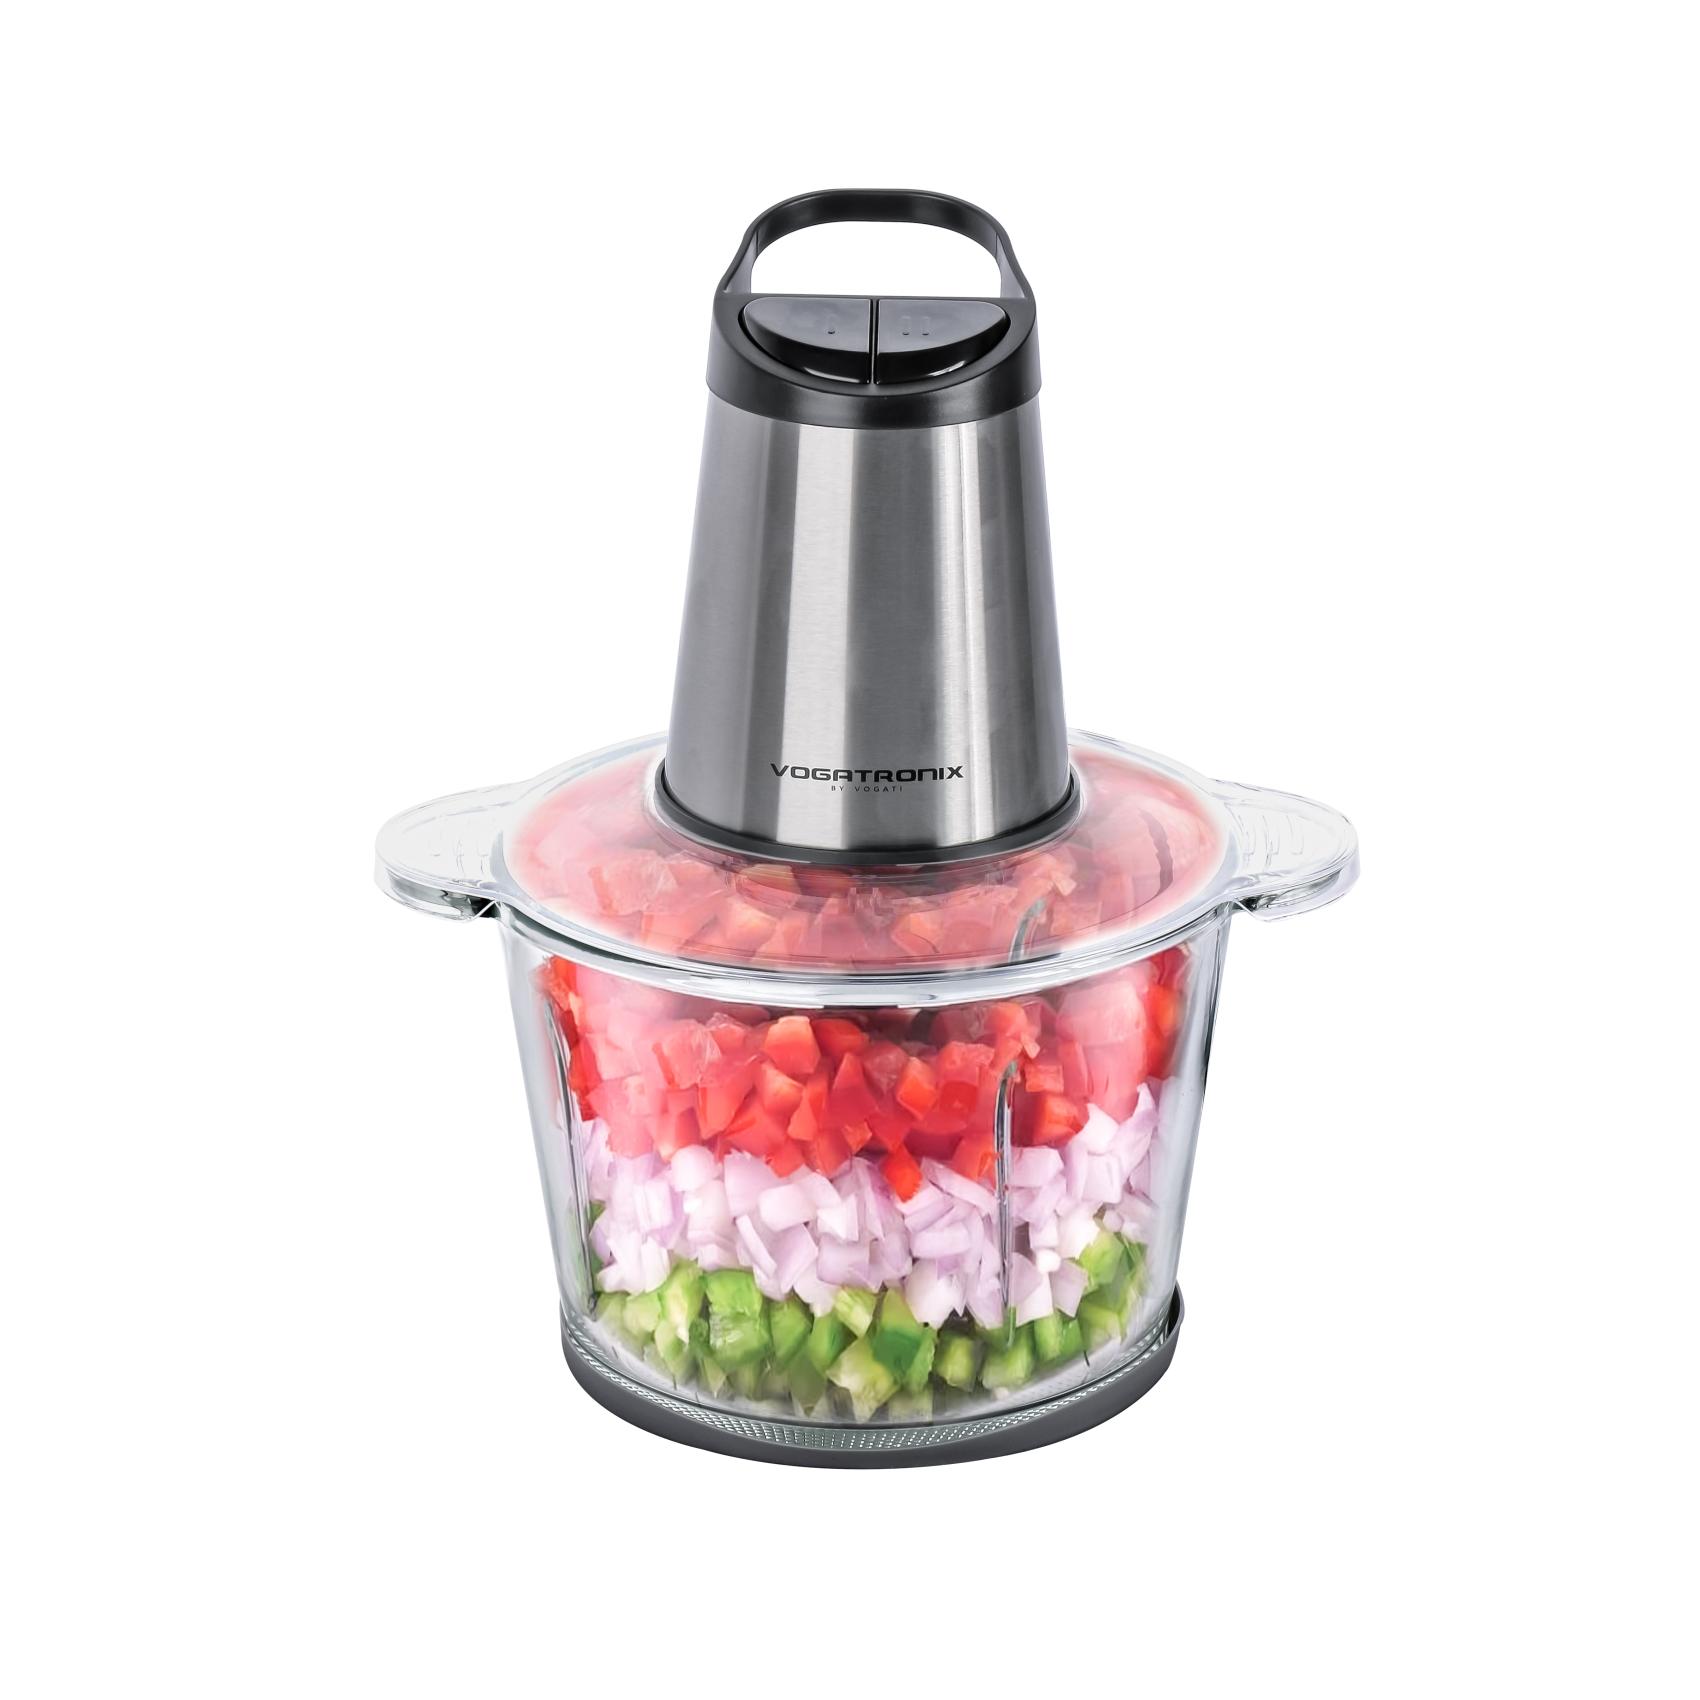 FOOD CHOPPER 350W | 3L LARGE GLASS BOWL | STAINLESS STEEL HOUSING | 6 BLADES | CHOPP - MINCE -CRUSH - GRIND | 2 SPEED | EXTRA GARLIC PEELER | OVER HEAT PROTCTION VE-180